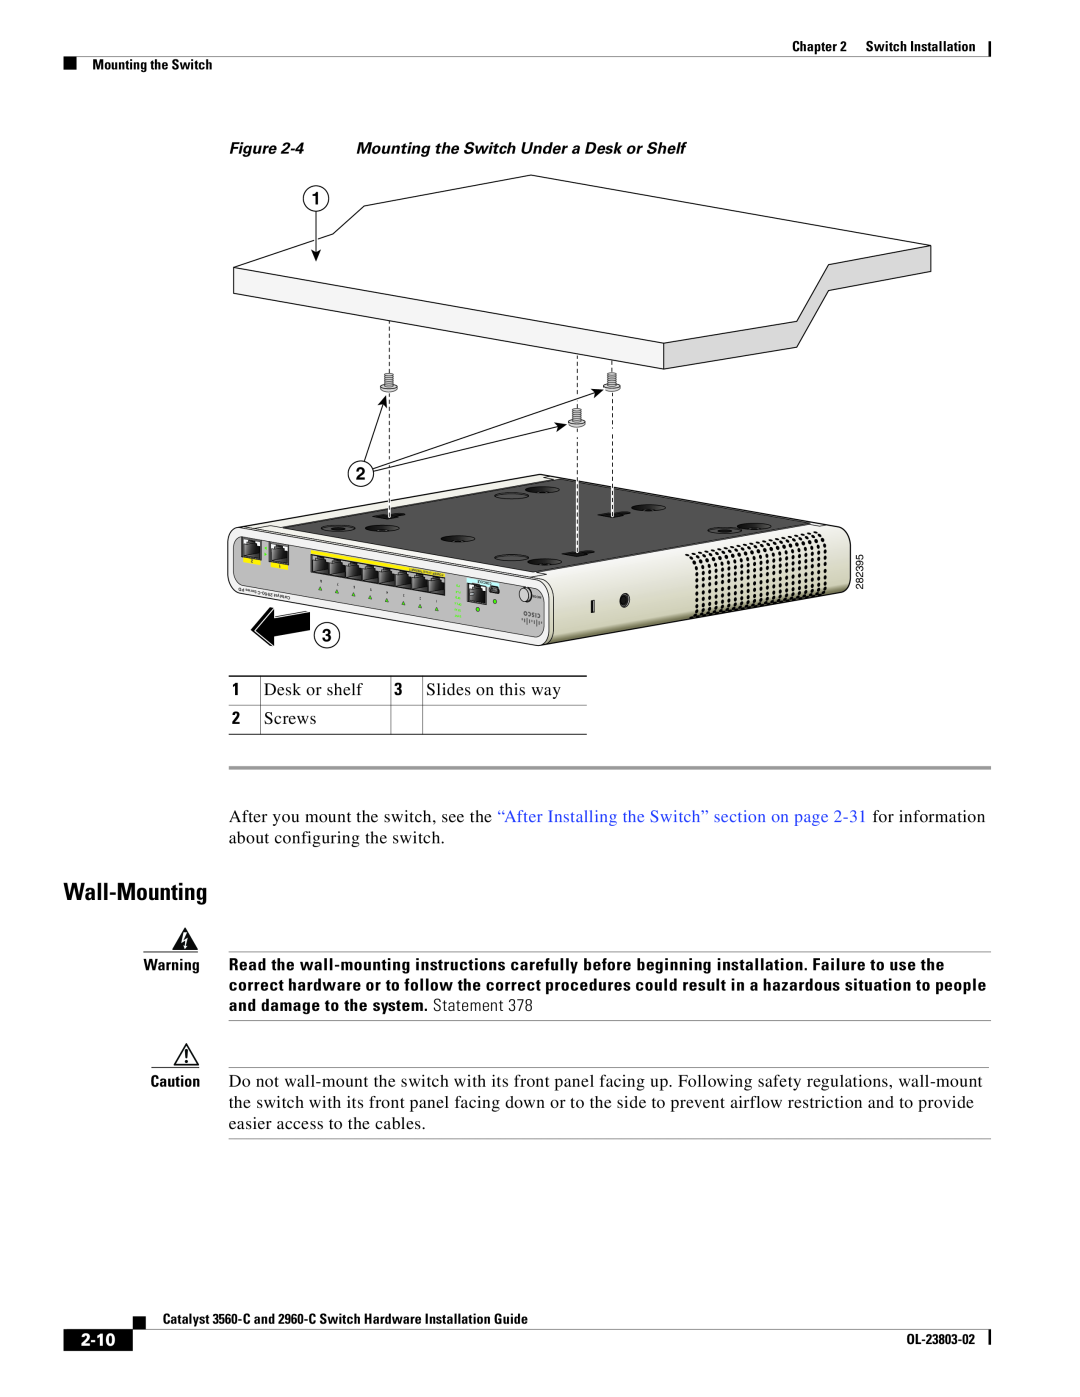 Cisco Systems N55M4Q manual Wall-Mounting, 2-10, Desk or shelf, Slides on this way 